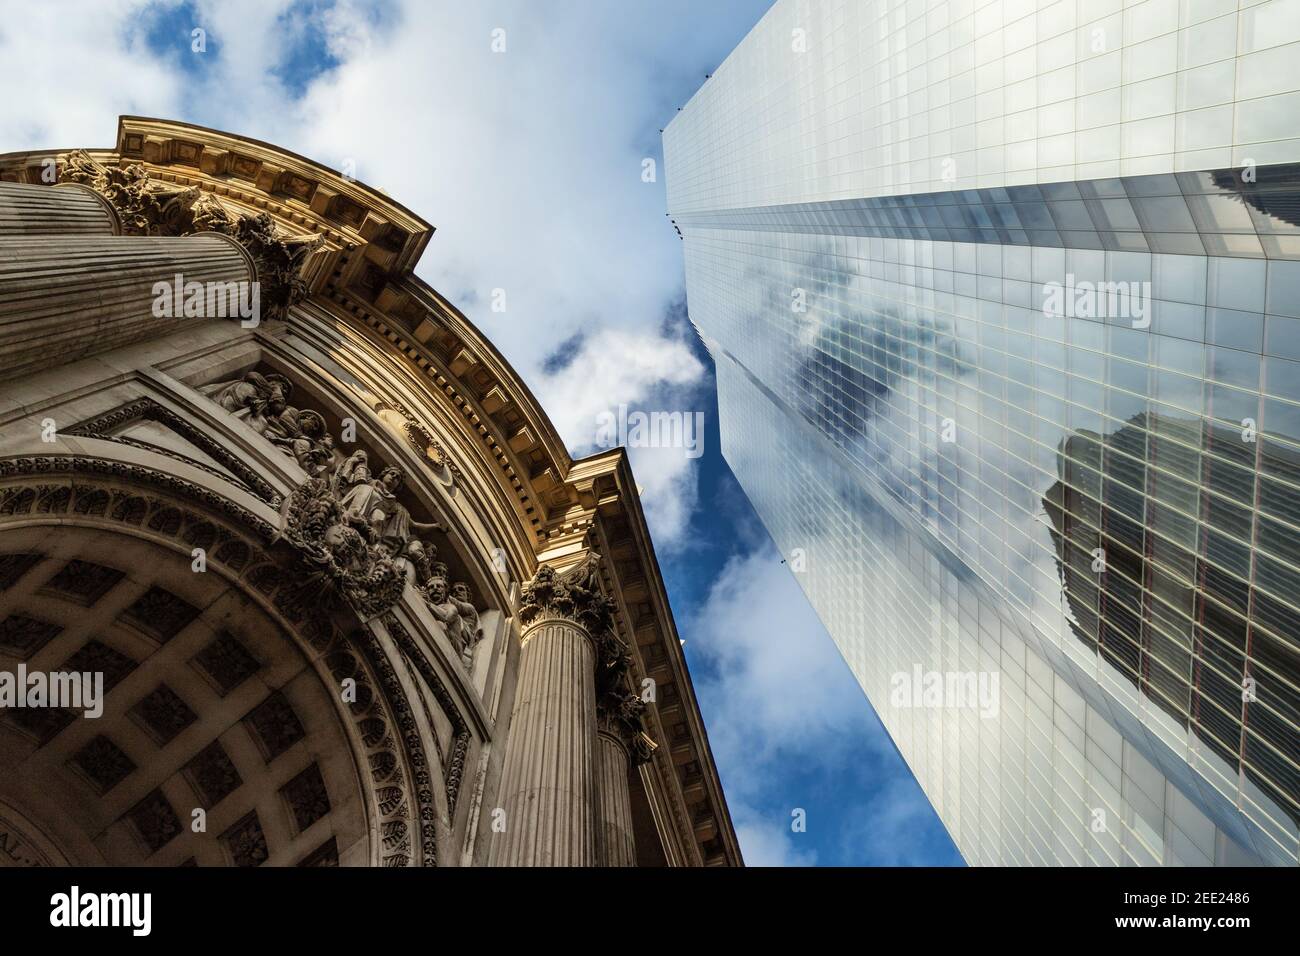 View looking up at 2 financial district buildings seperated by over 150 years of architectural design. Gibson Hall and 22 Bishopsgate Stock Photo